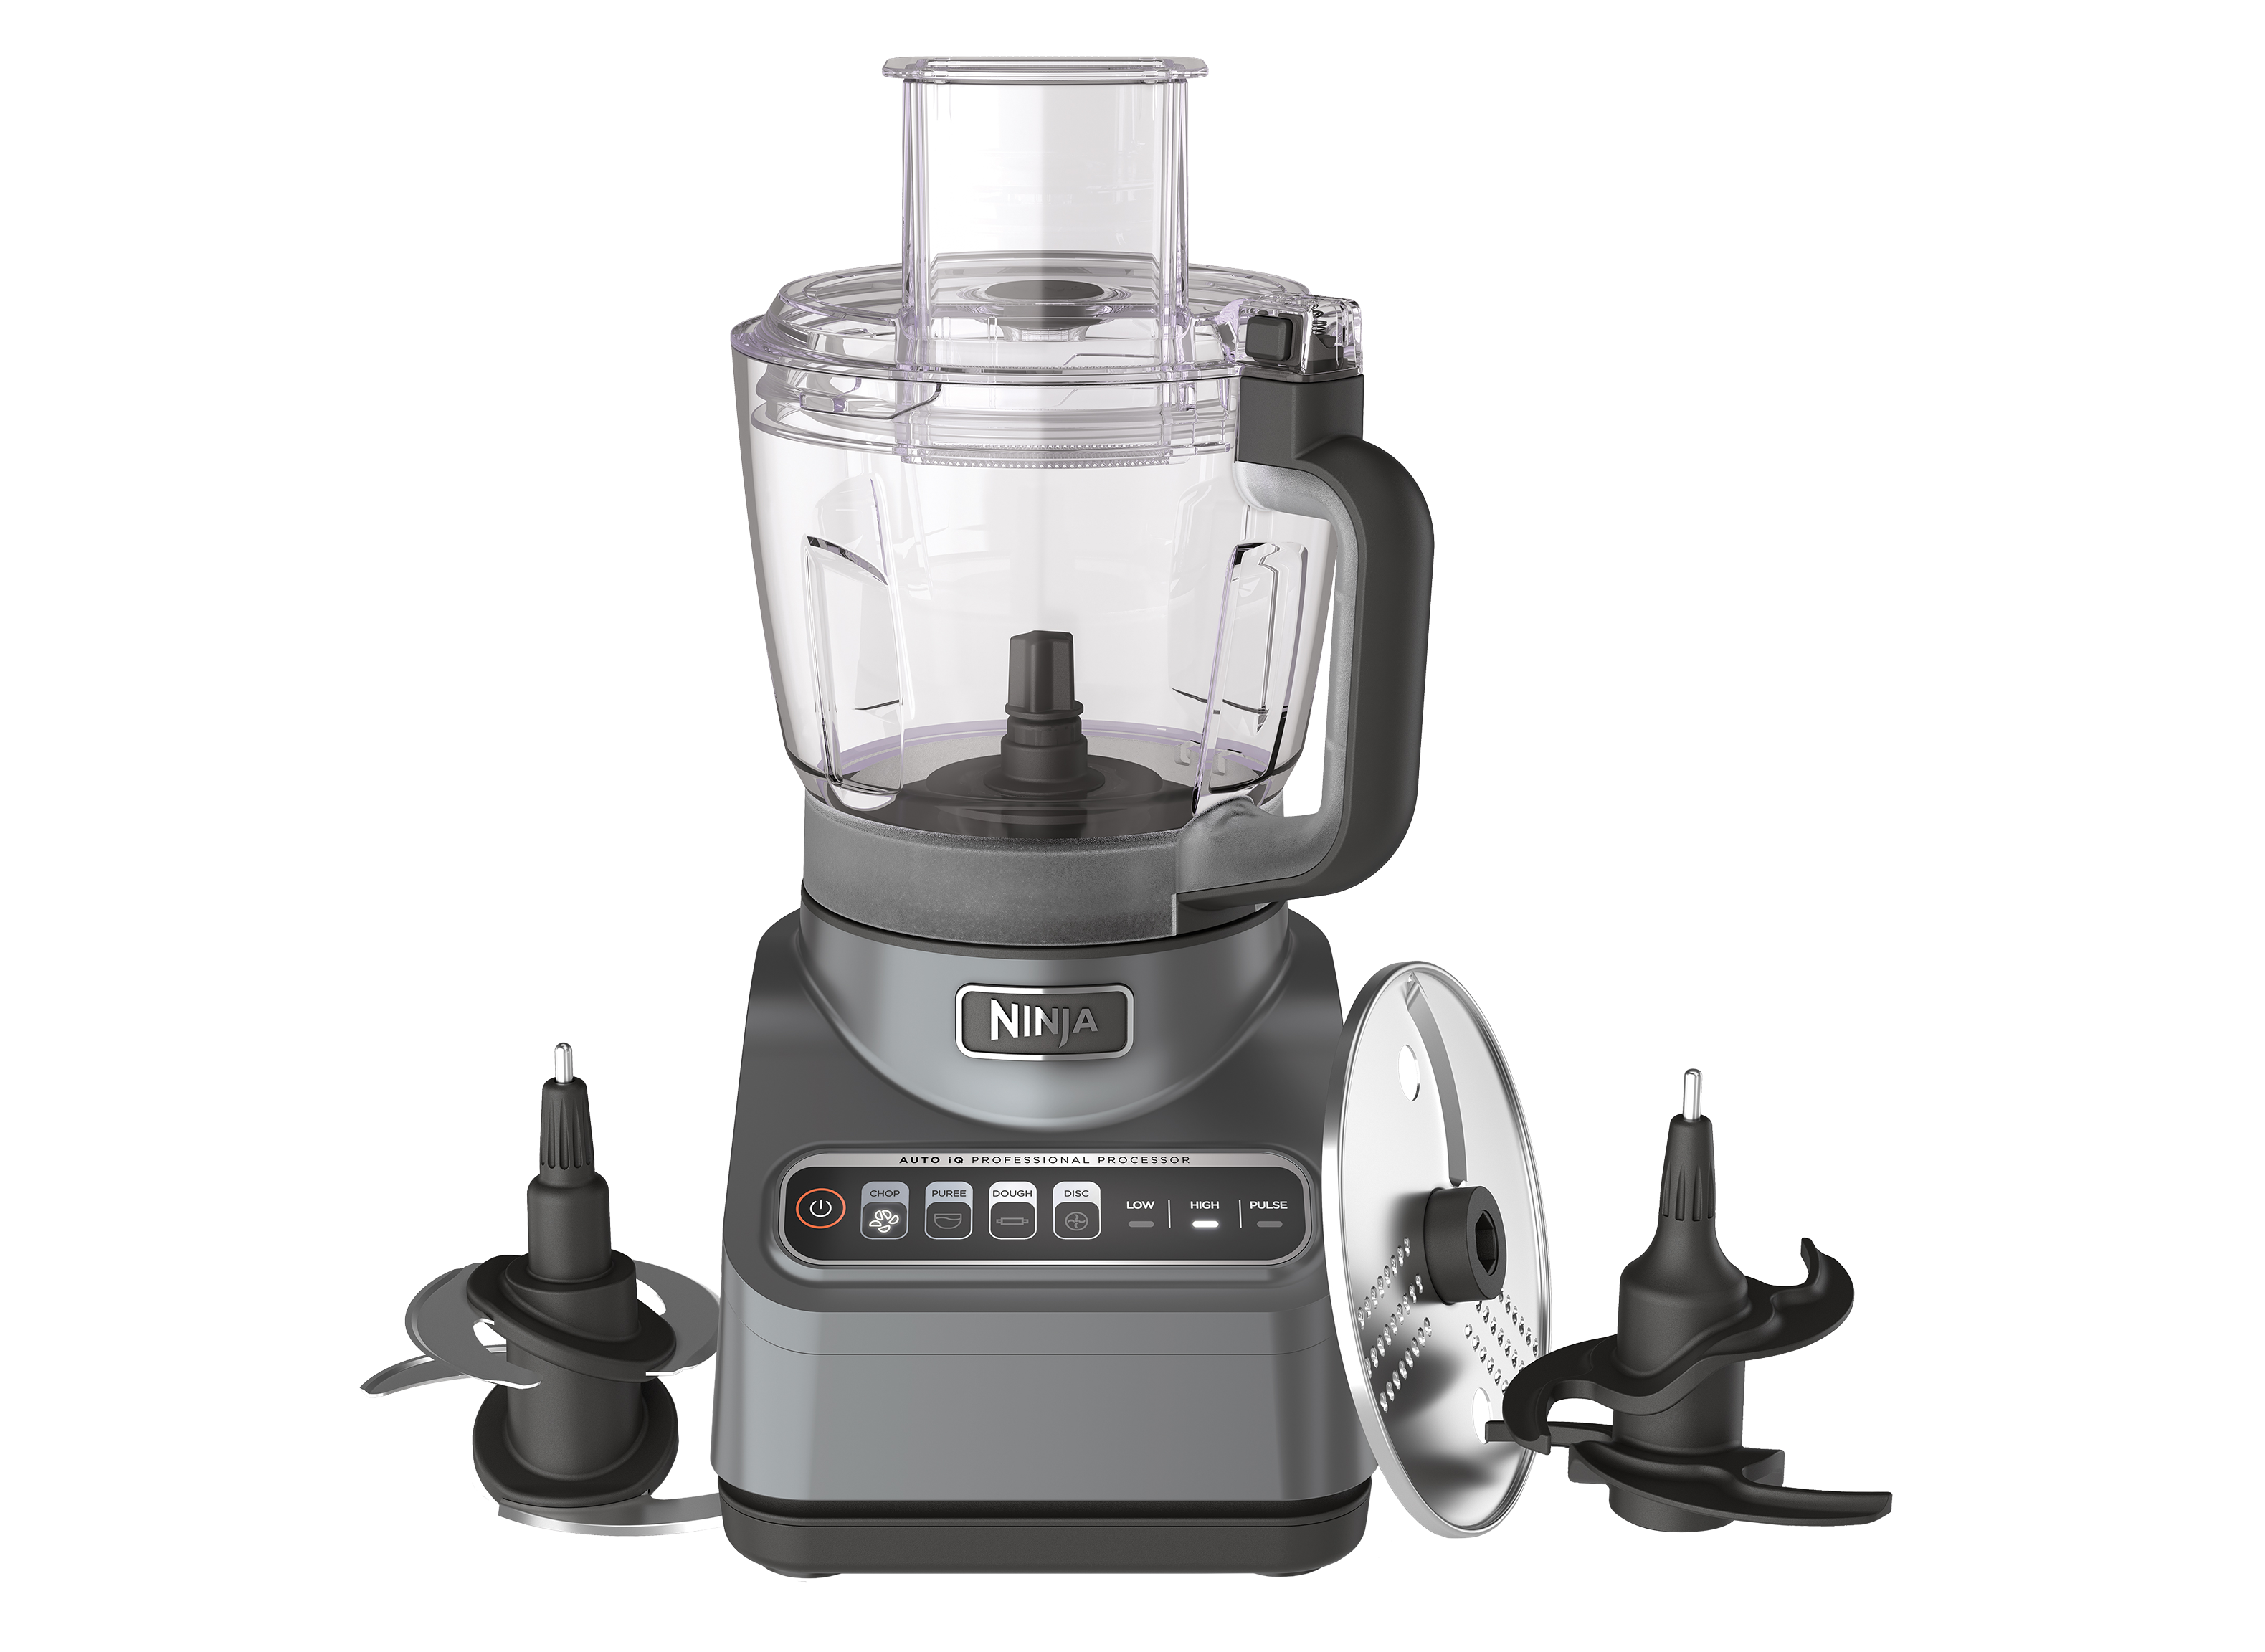 https://crdms.images.consumerreports.org/prod/products/cr/models/401566-food-processors-ninja-professional-plus-1000-peak-watts-bn601-with-auto-iq-preset-programs-10014022.png